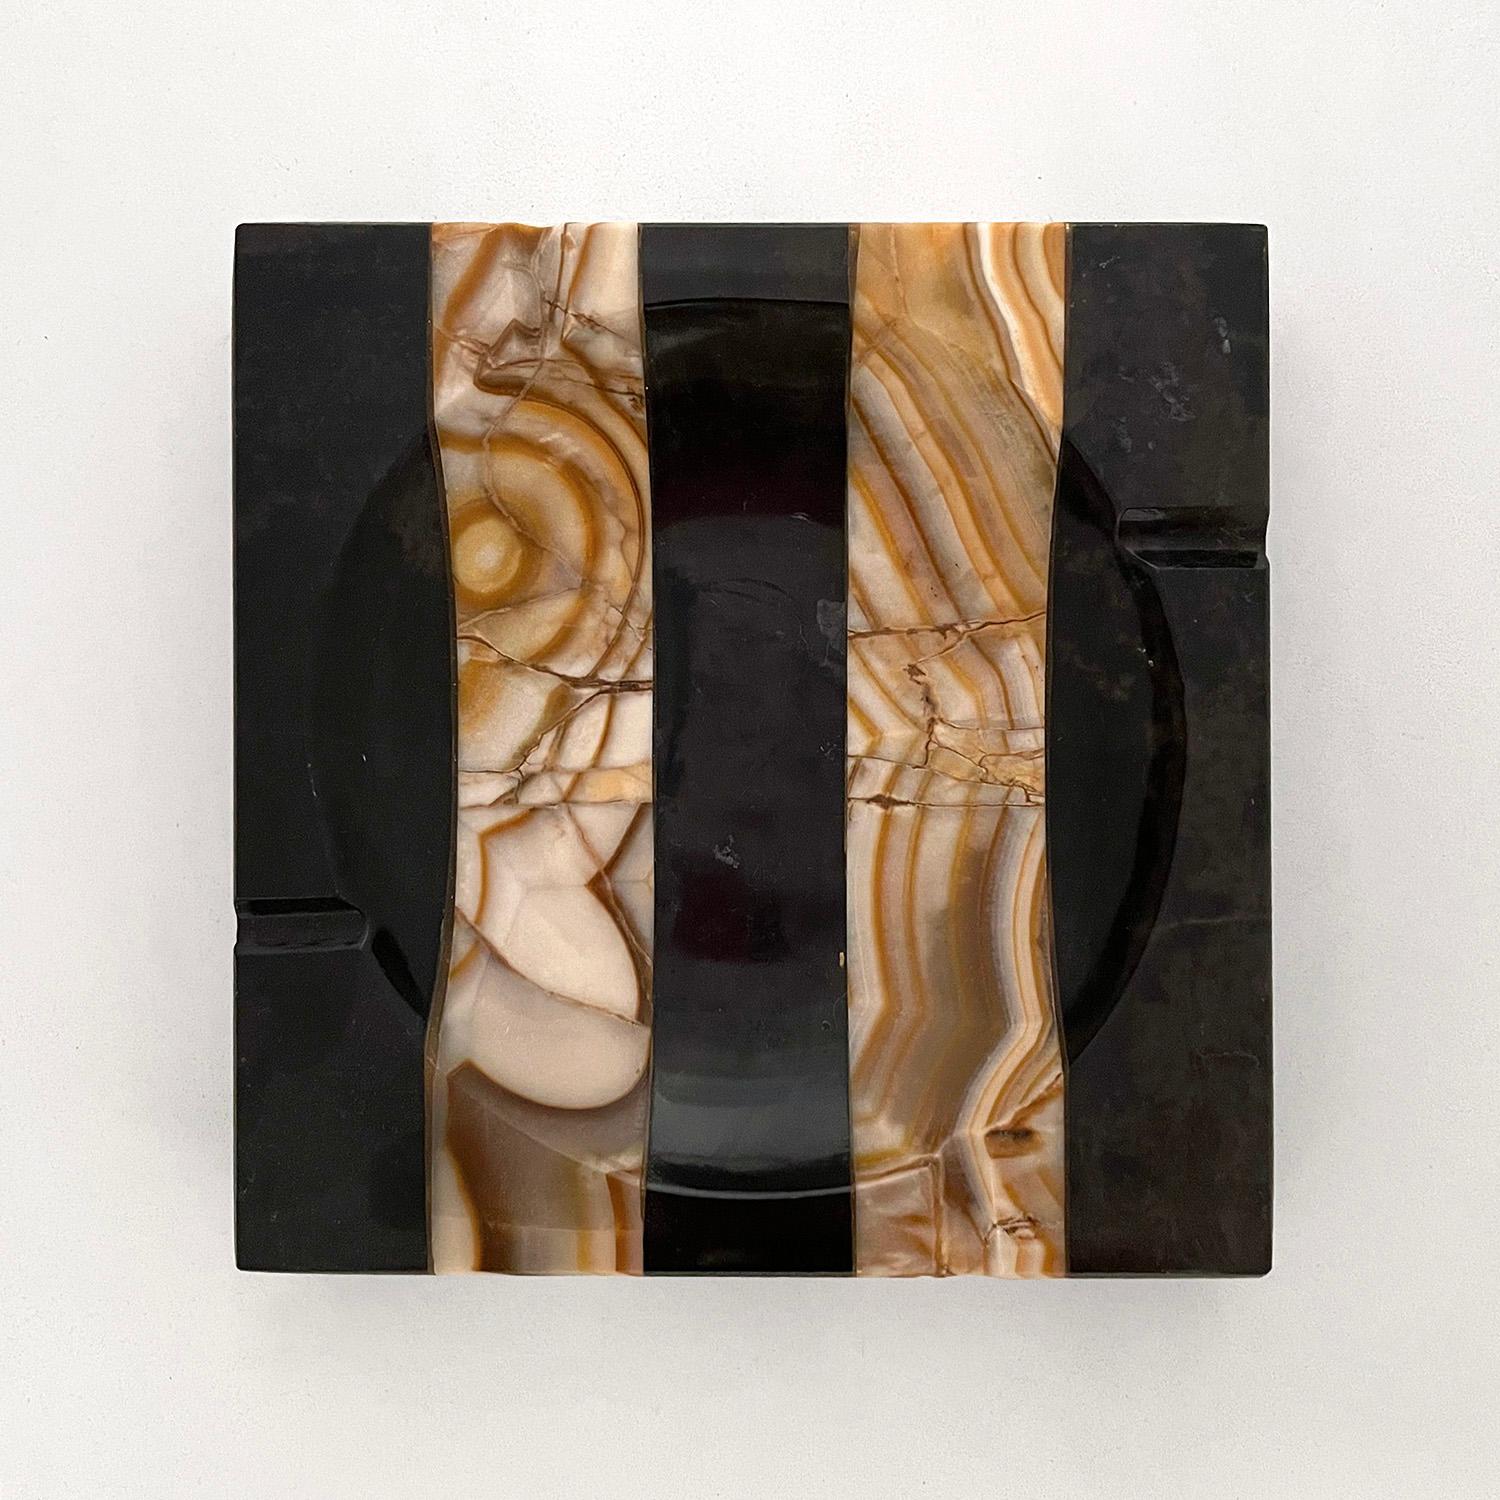 Italian mid century Marble & Onyx catch all ashtray
Italy, circa 1960’s
This dramatic statement piece will bring your coffee table to life
Substantial in it's weight and construction 
Wonderful grain detail throughout 
Visually stunning work of art